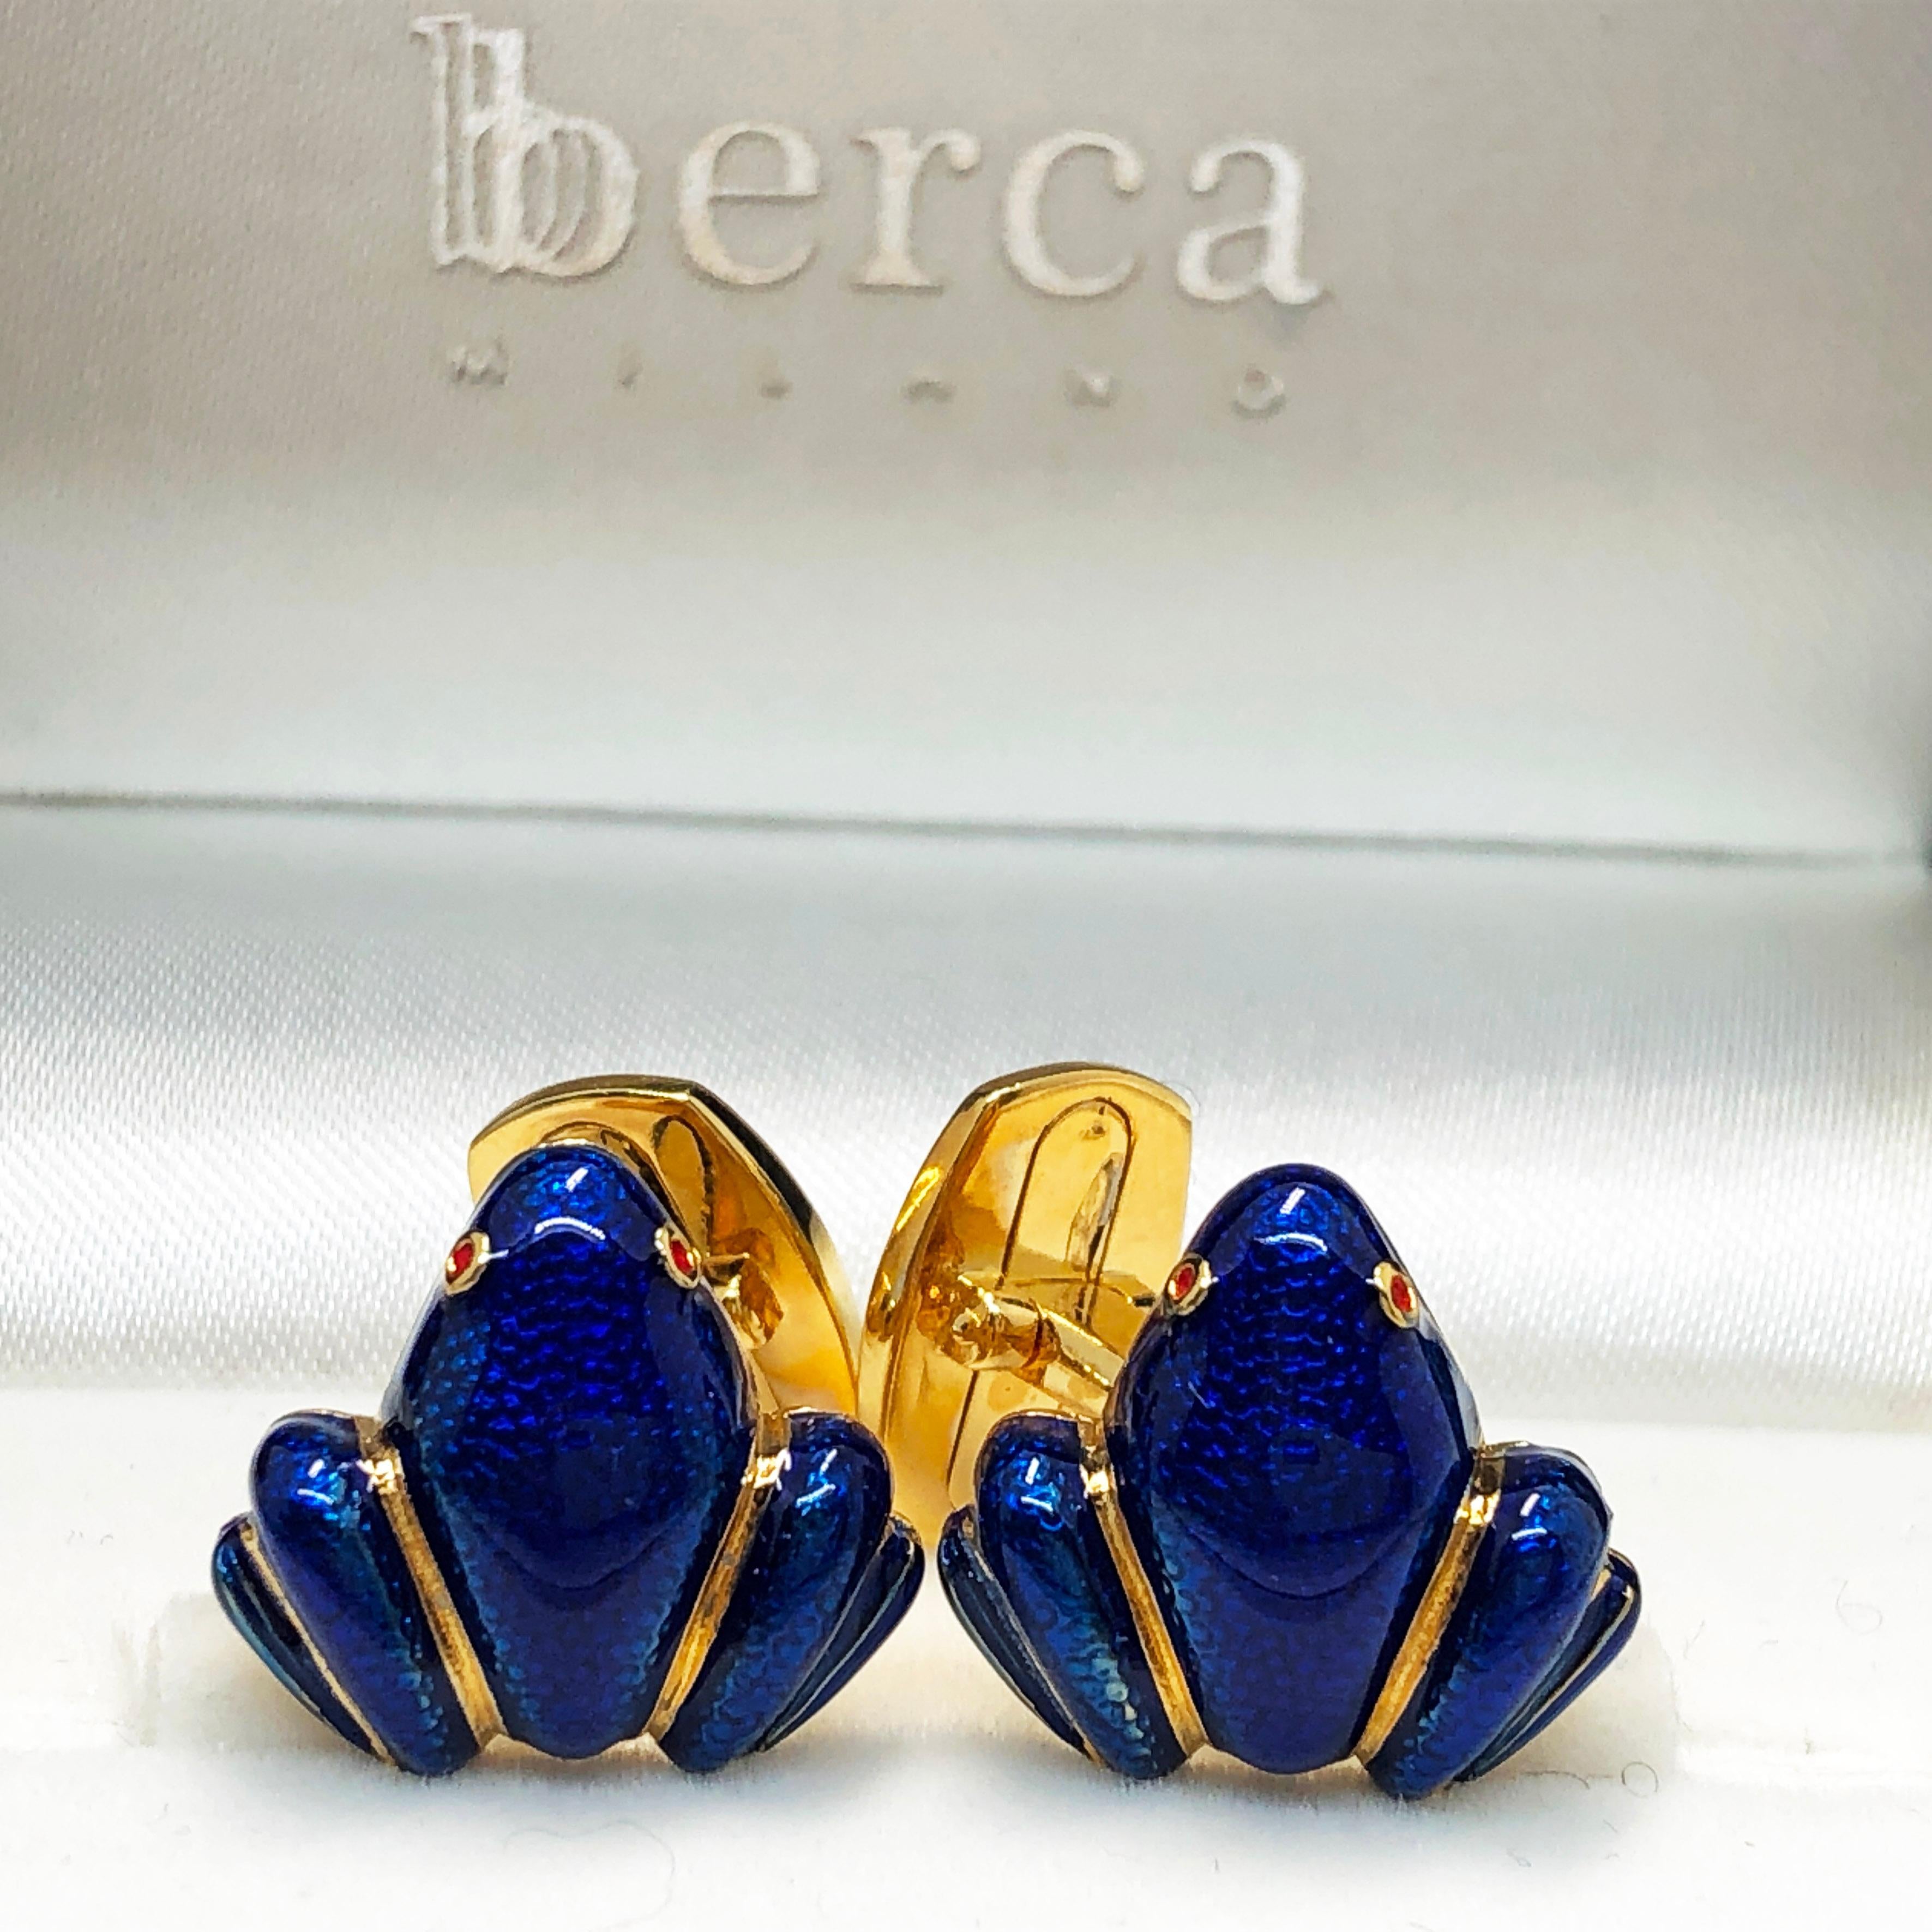 Contemporary Berca Navy Blue Hand Enameled Frog Shaped Sterling Silver Gold-Plated Cufflinks